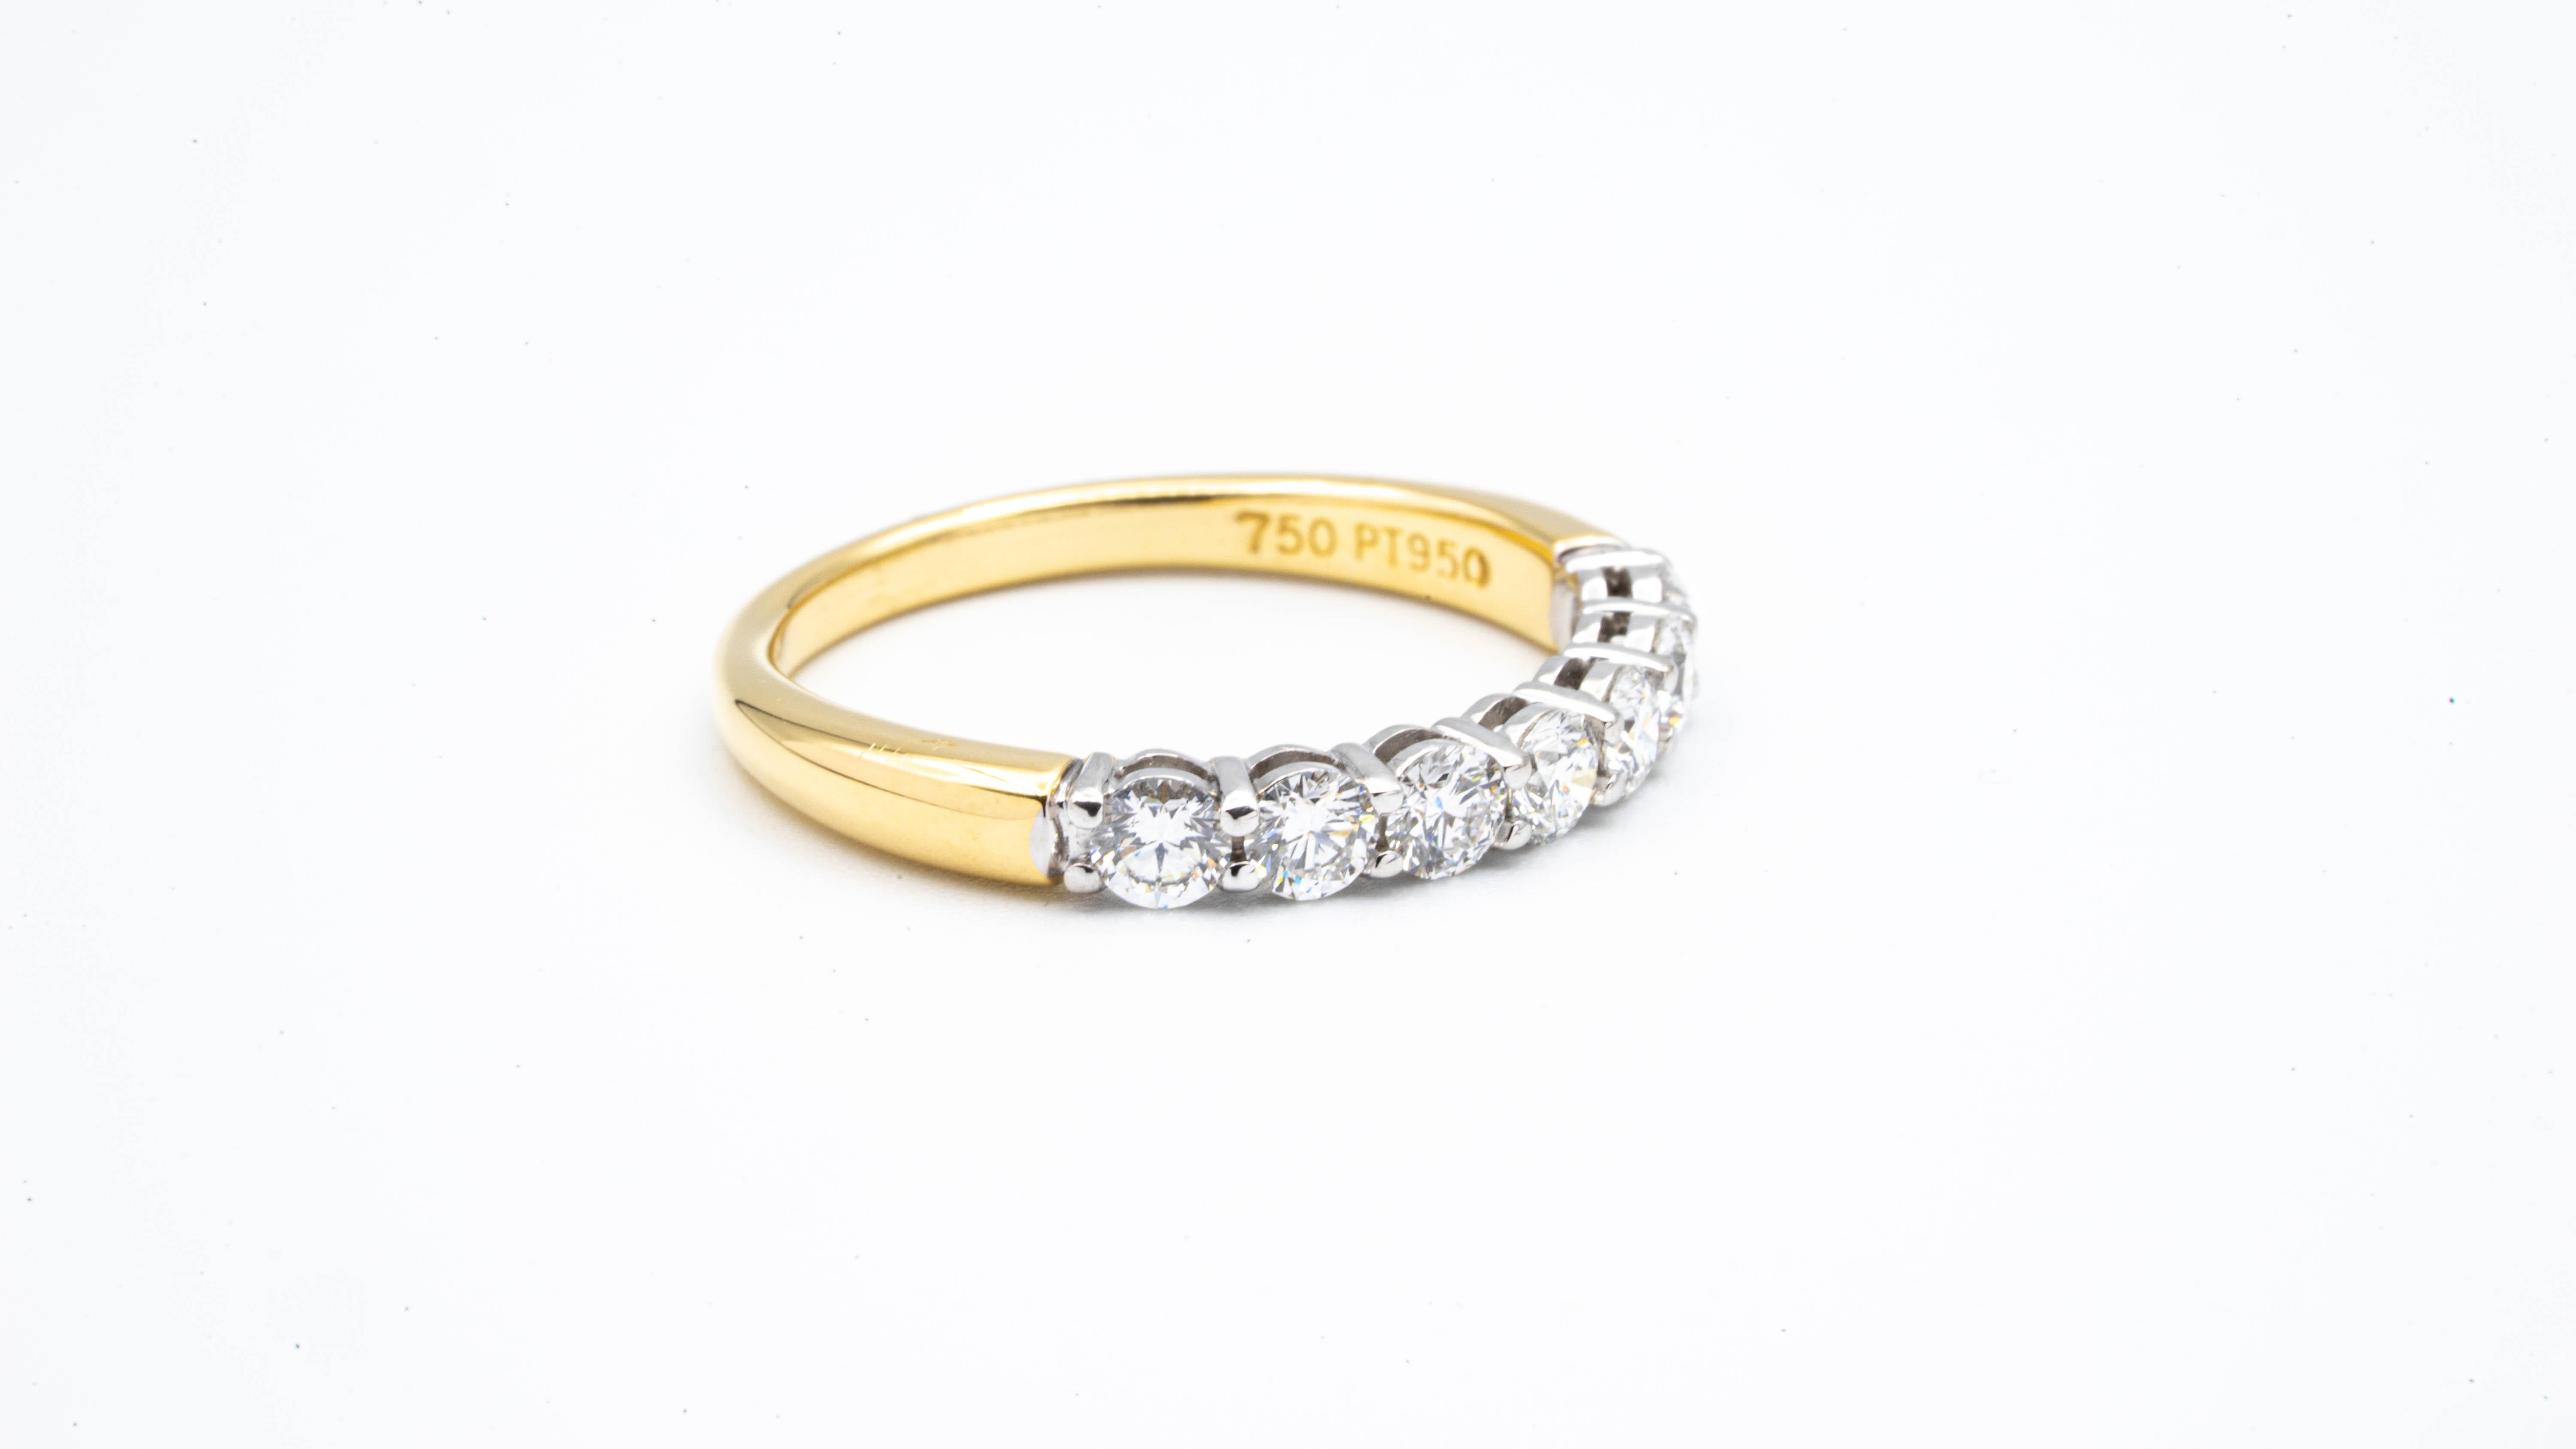 Tiffany & Co. Band ring finely crafted in platinum and 18 Karat yellow gold with 7 Round Brilliant cut diamonds weighing .57 carats total weight approximately. 

Stamp: Tiffany & Co. PT950
Size: 6.25 ( can re-size)
Includes Tiffany Black Suede Box